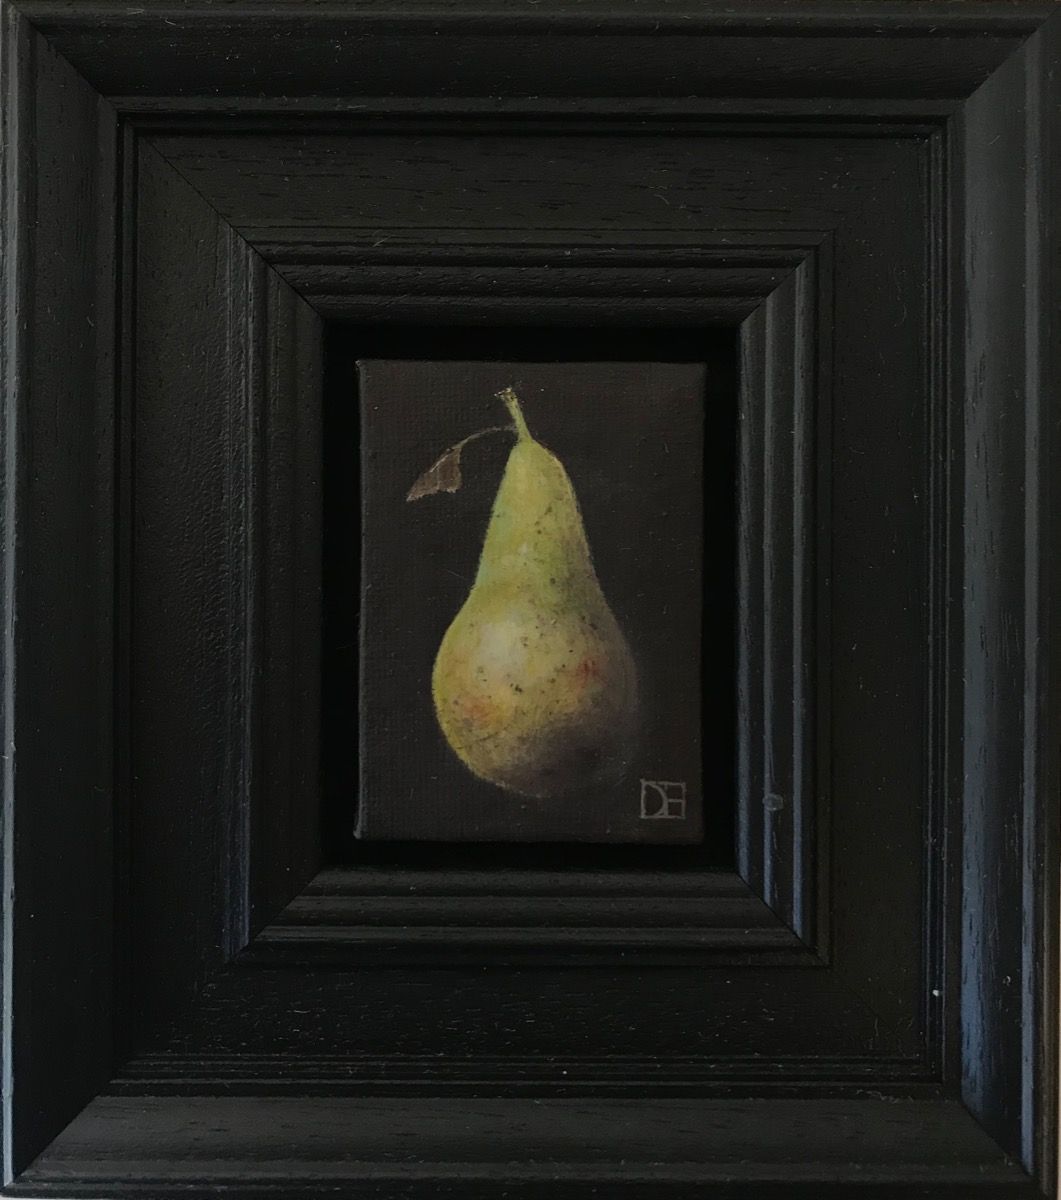 Pocket Conference Pear by Dani Humberstone